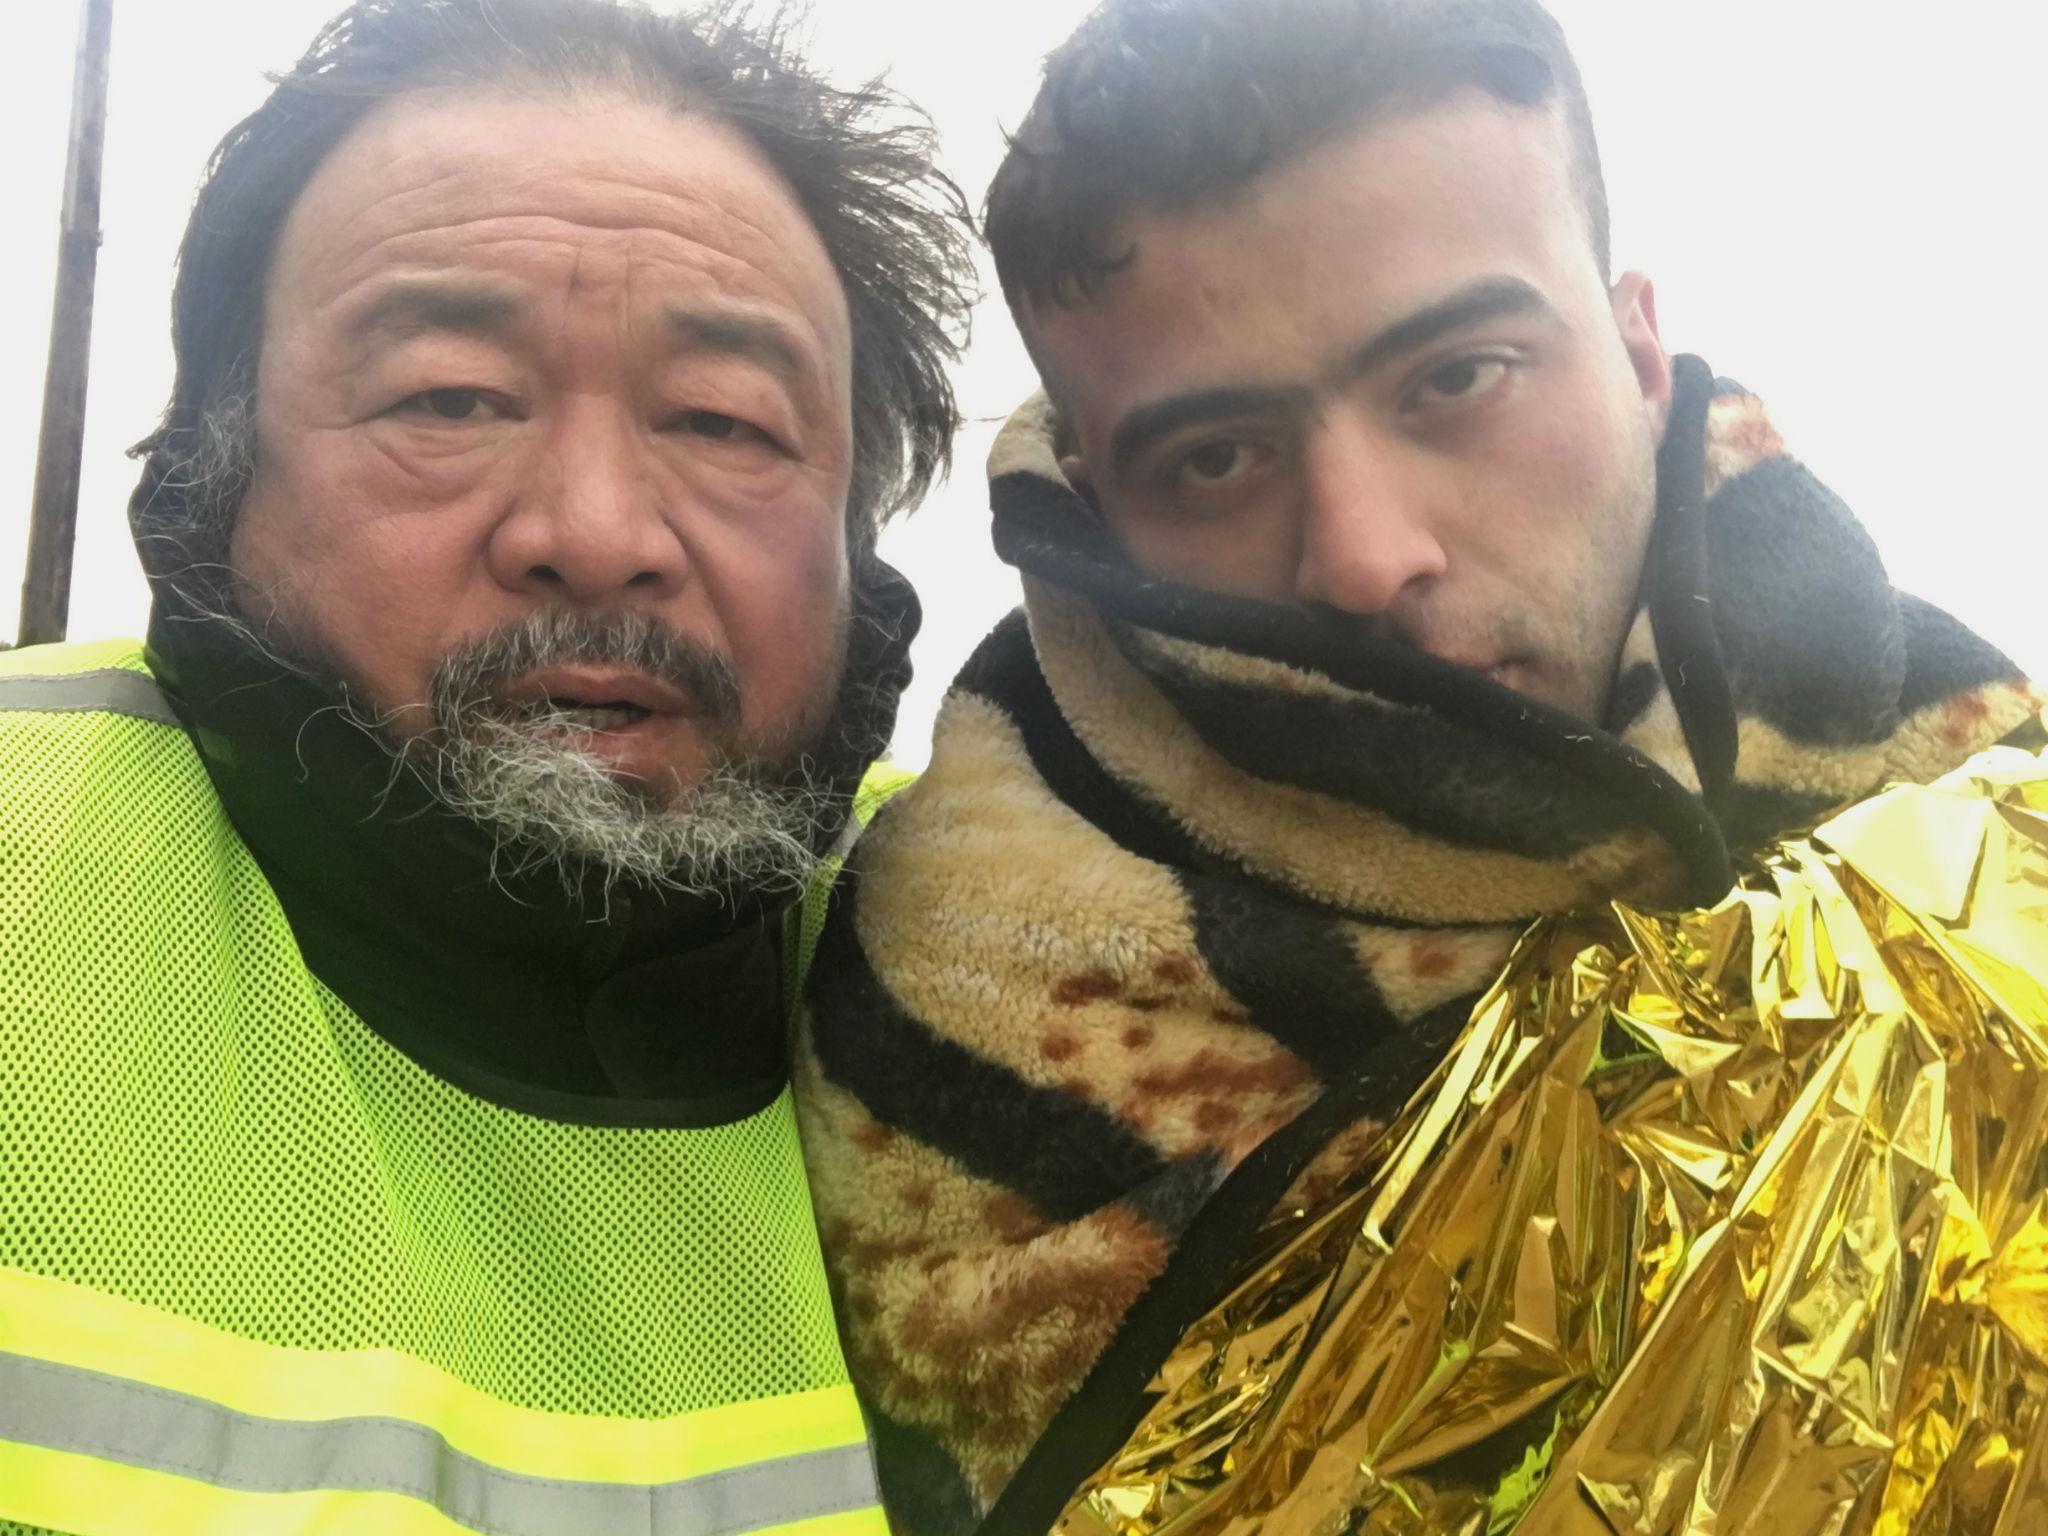 The artist and filmmaker Ai Weiwei with a refugee on the island of Lesbos in Greece for his film 'Human Flow'